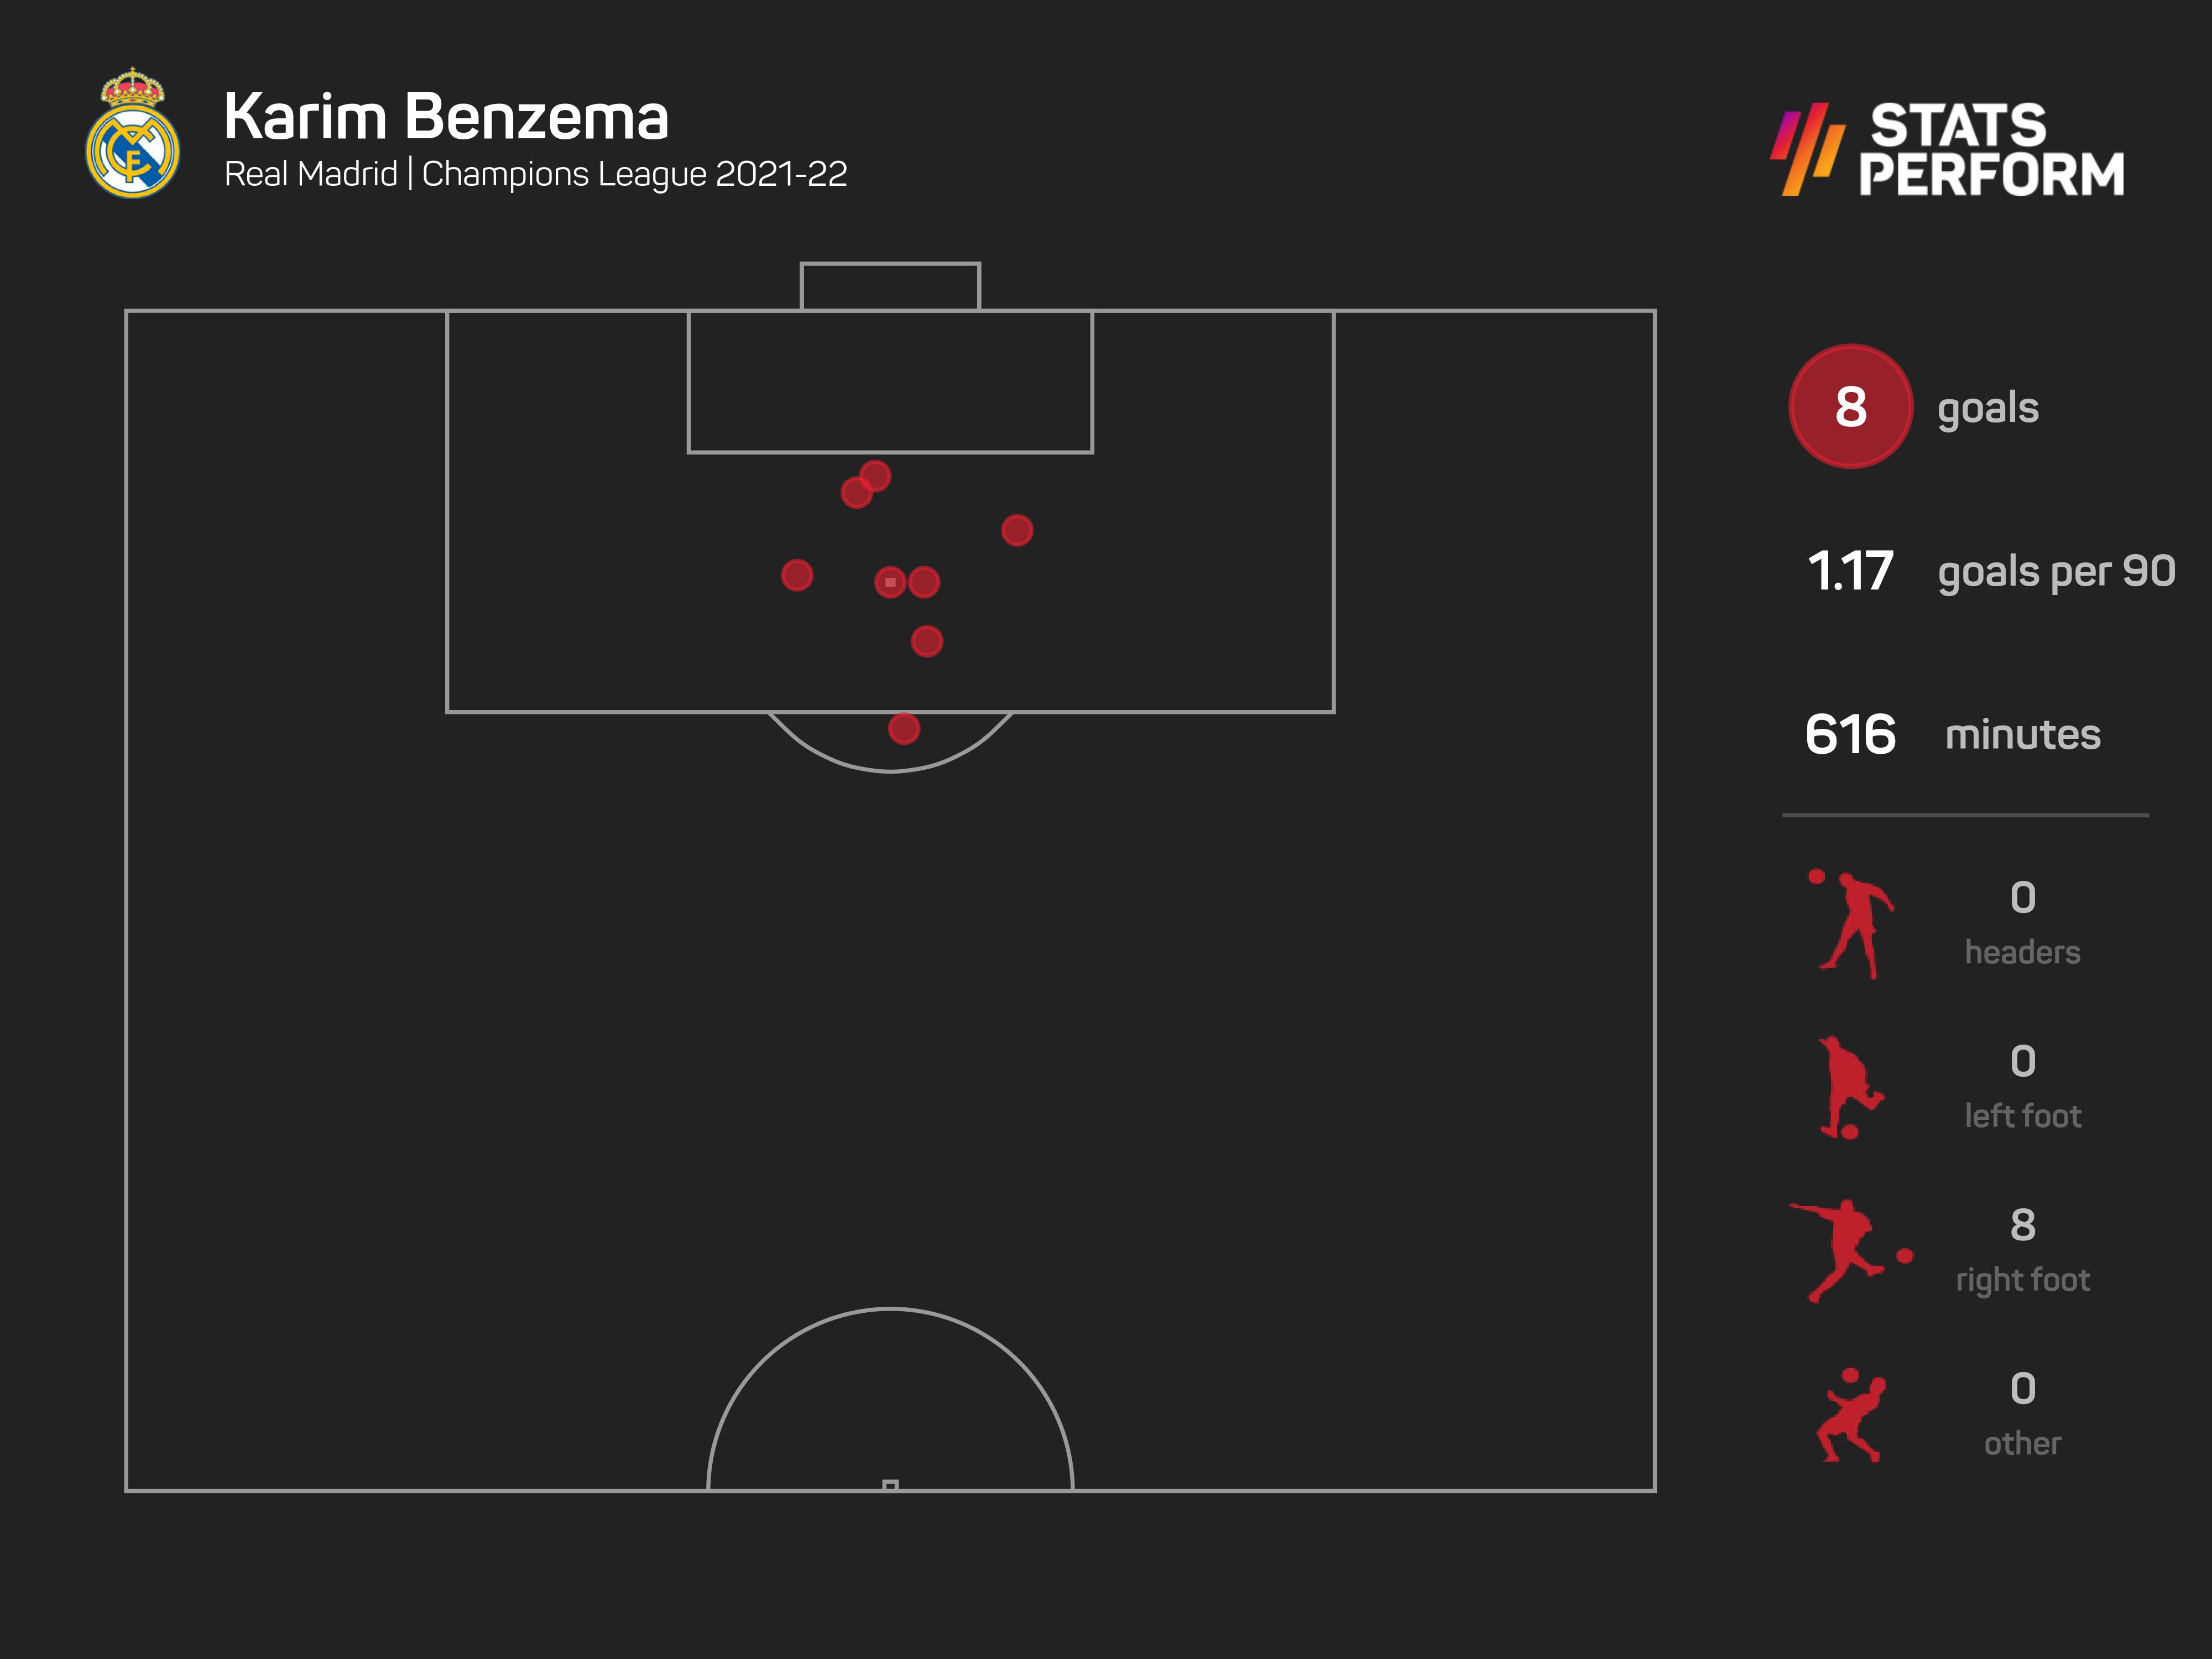 Karim Benzema has been the driving force for Real Madrid